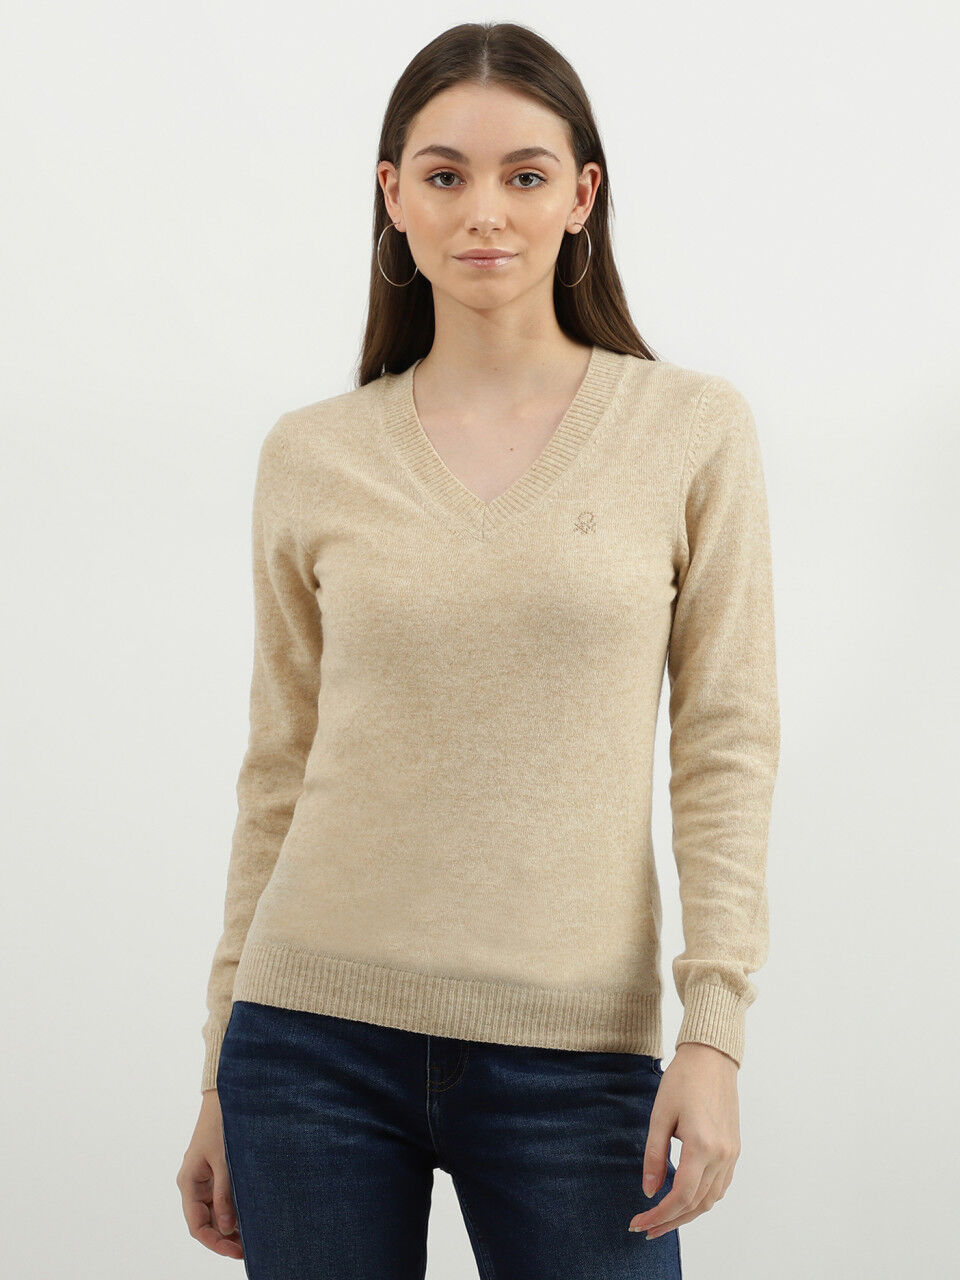 United Colors Of Benetton Women Solid V-Neck Sweater